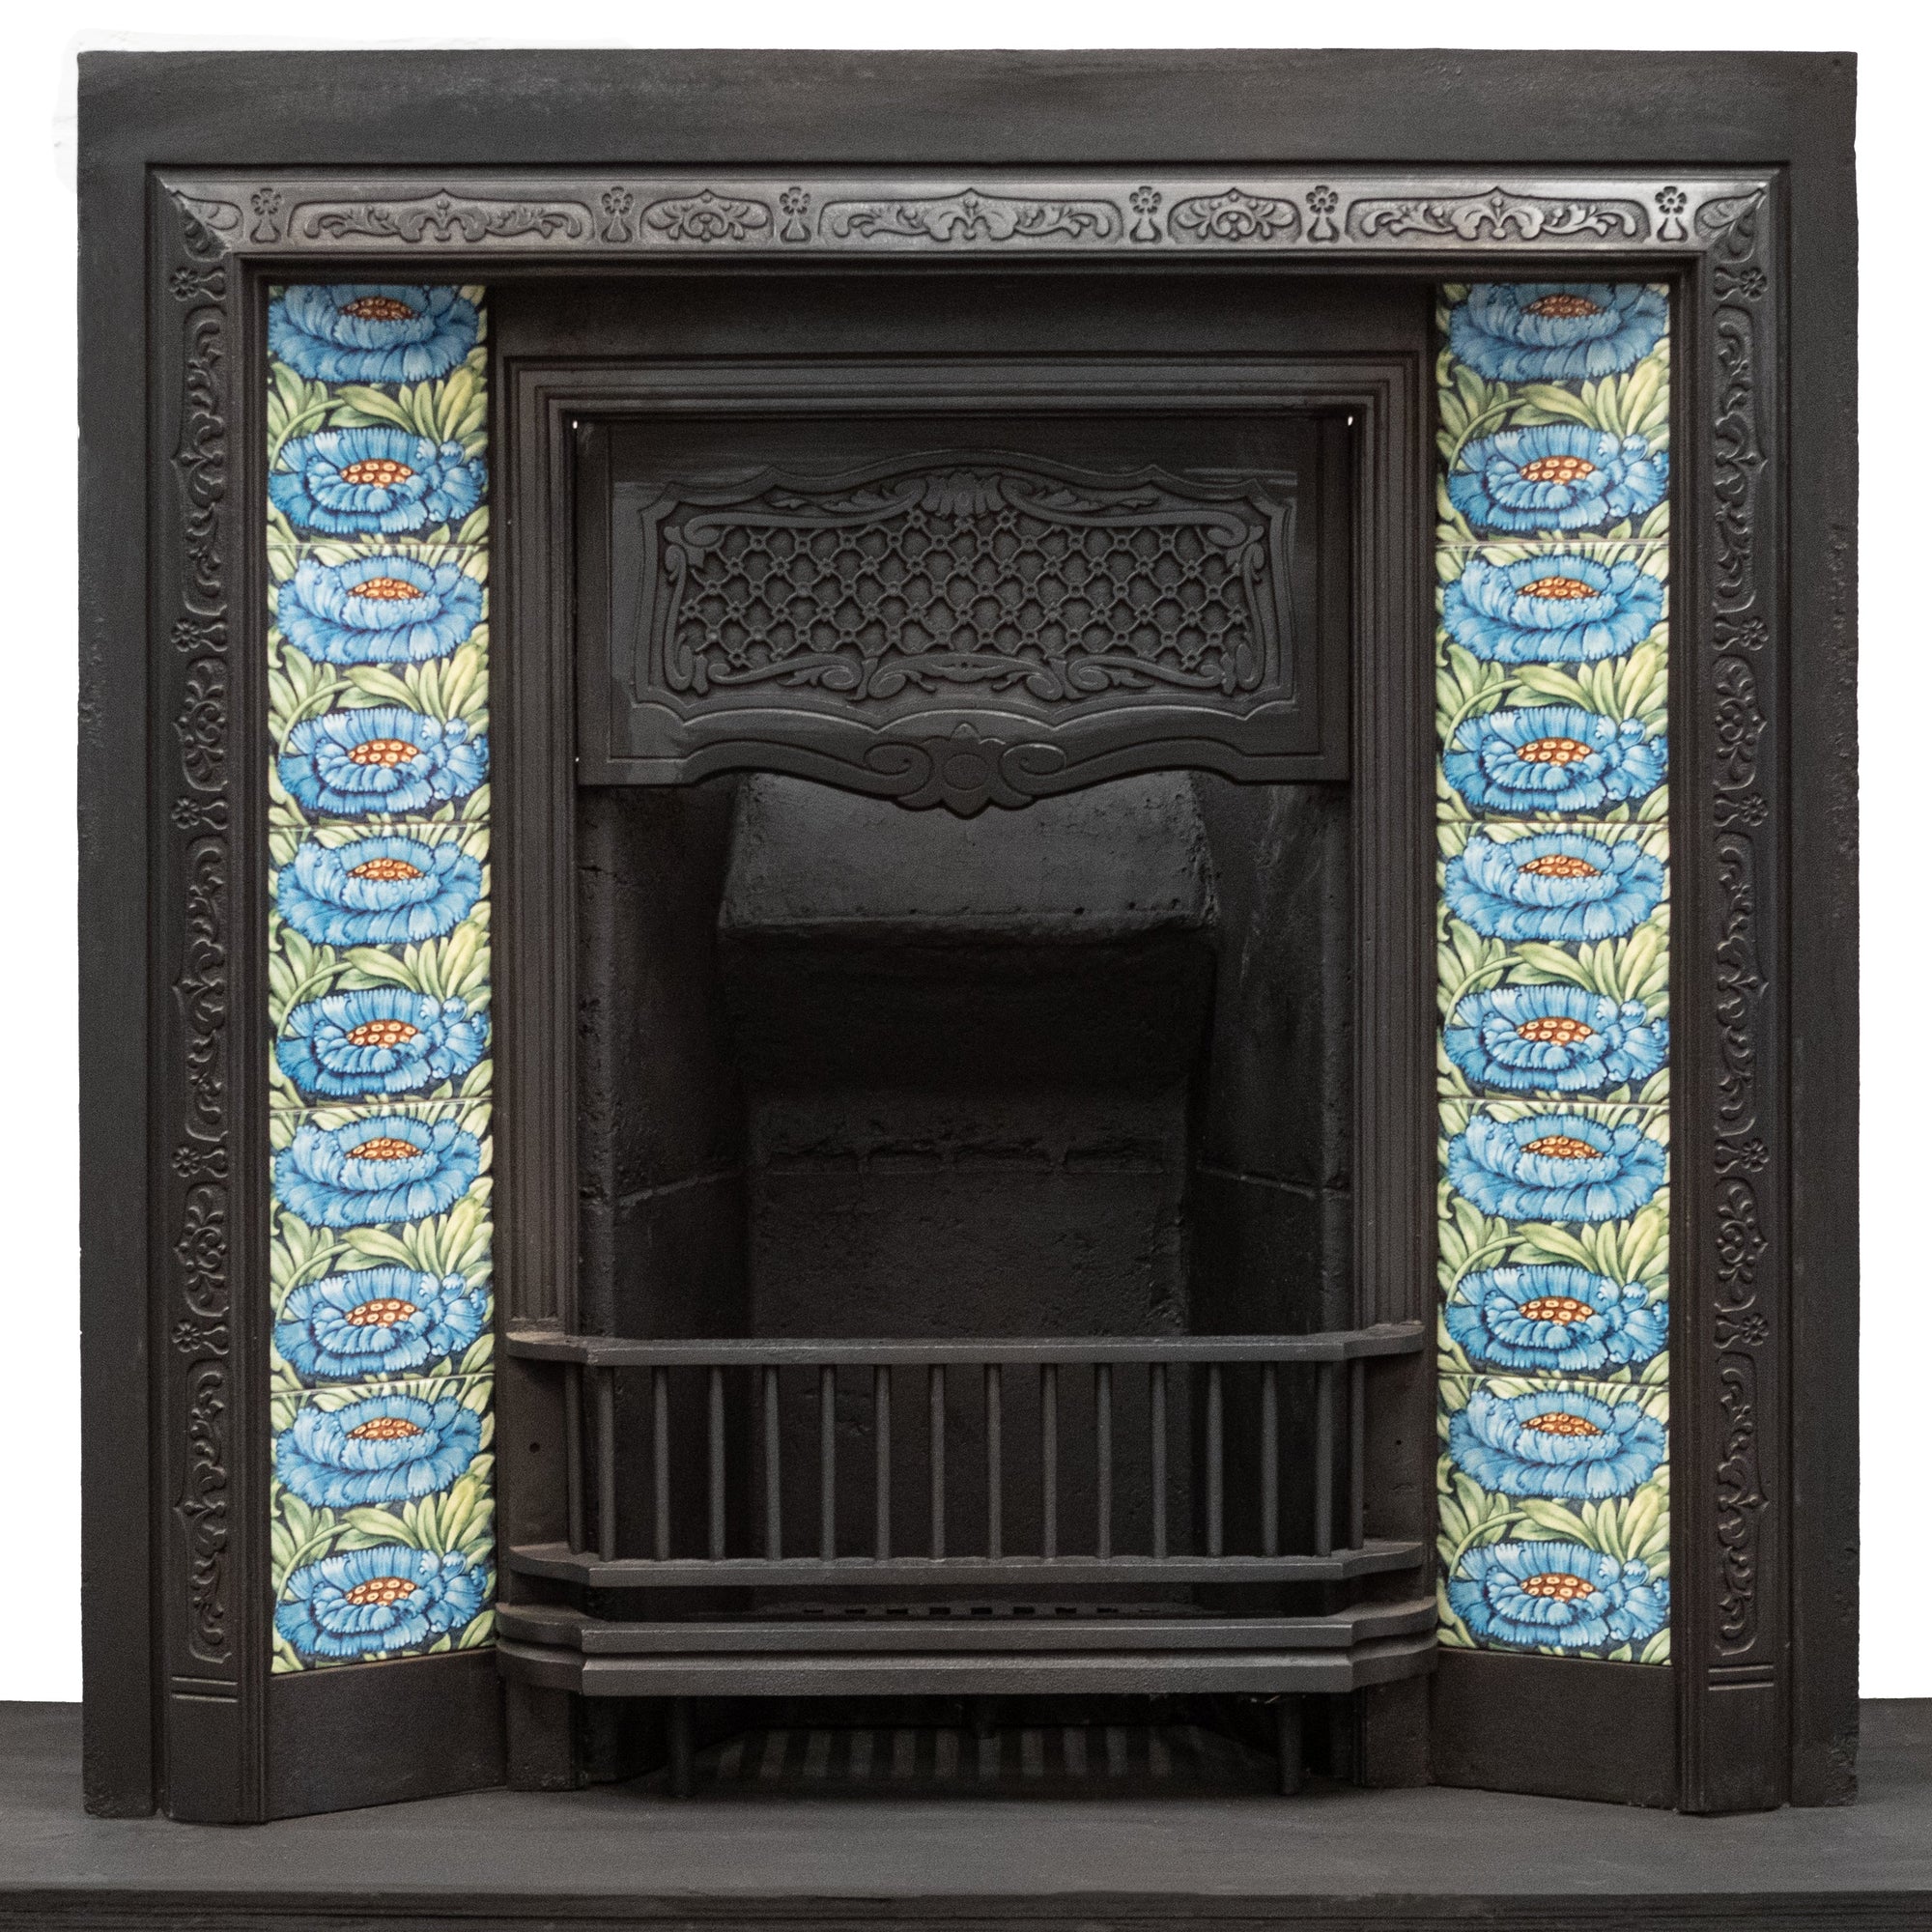 Antique Cast Iron Insert with Blue Floral Tiles | The Architectural Forum